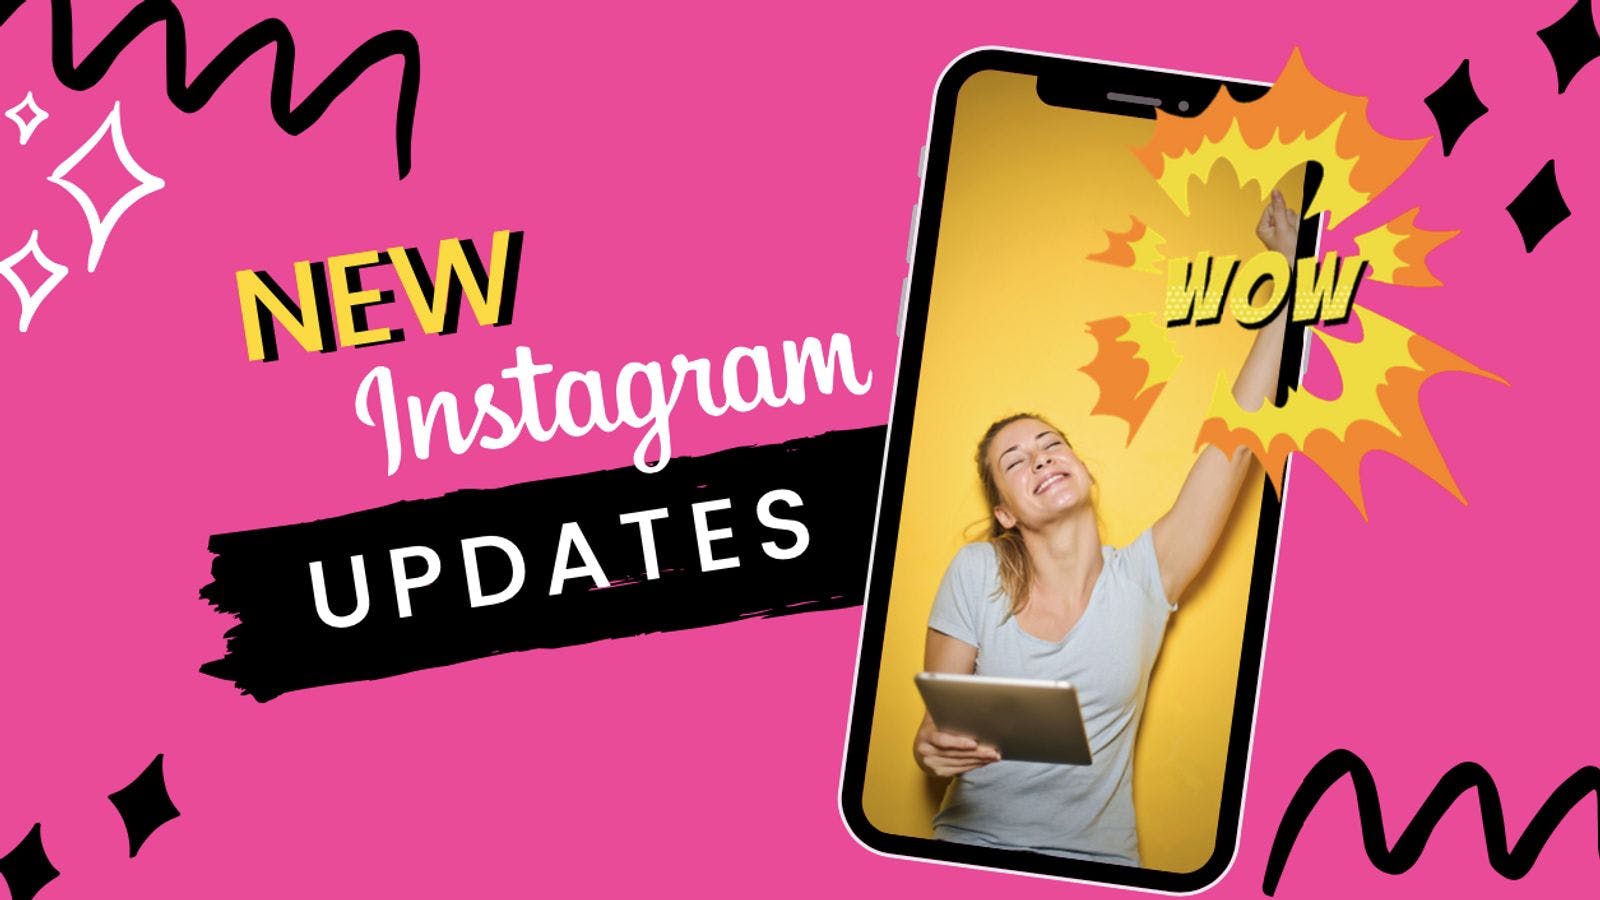 3 Instagram Features We're Excited for in 2020